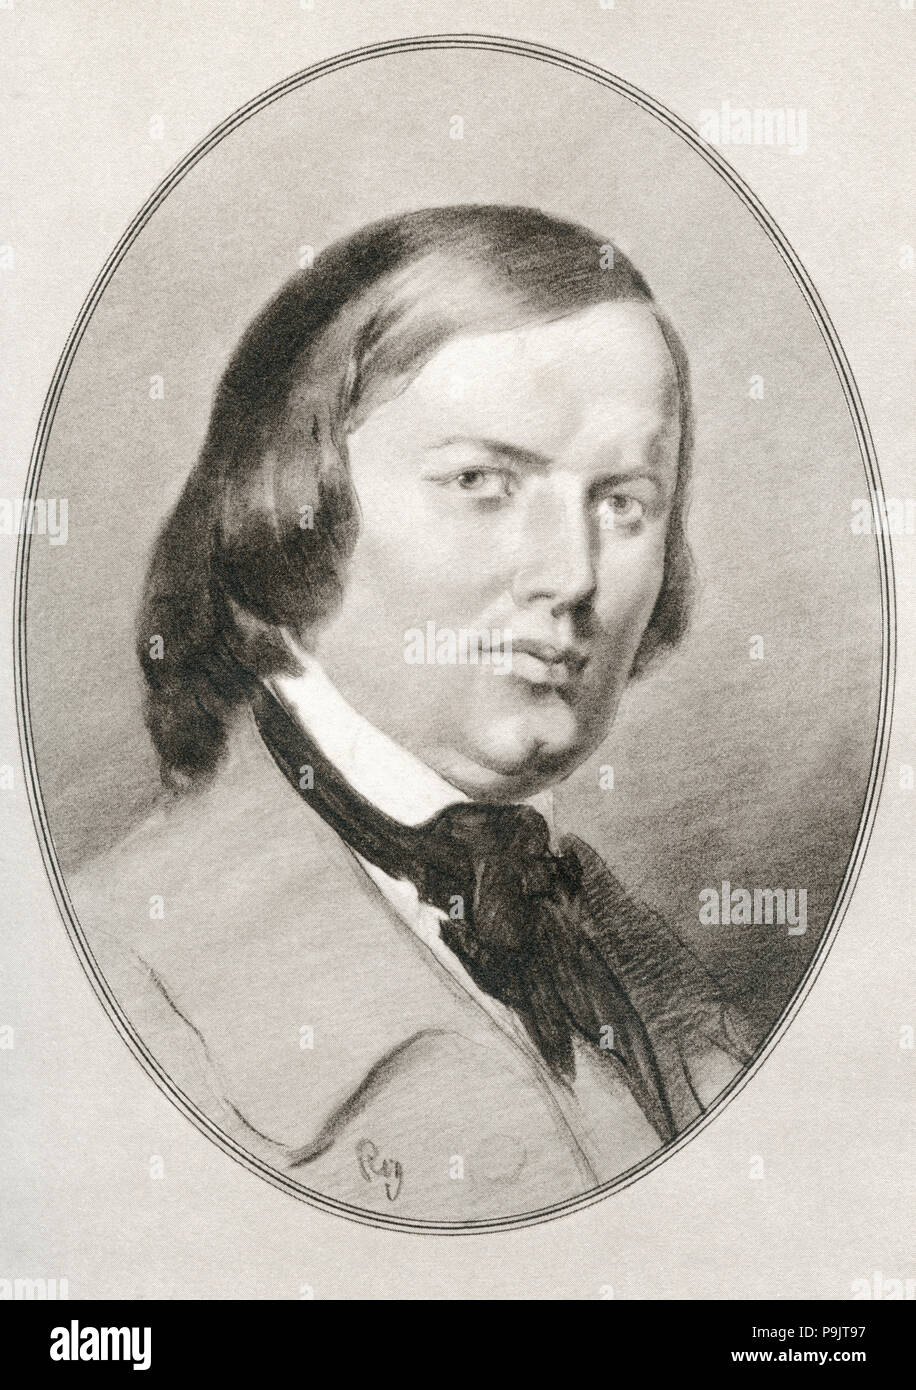 Robert Schumann, 1810 – 1856.  German composer and an influential music critic.  Illustration by Gordon Ross, American artist and illustrator (1873-1946), from Living Biographies of Great Composers. Stock Photo